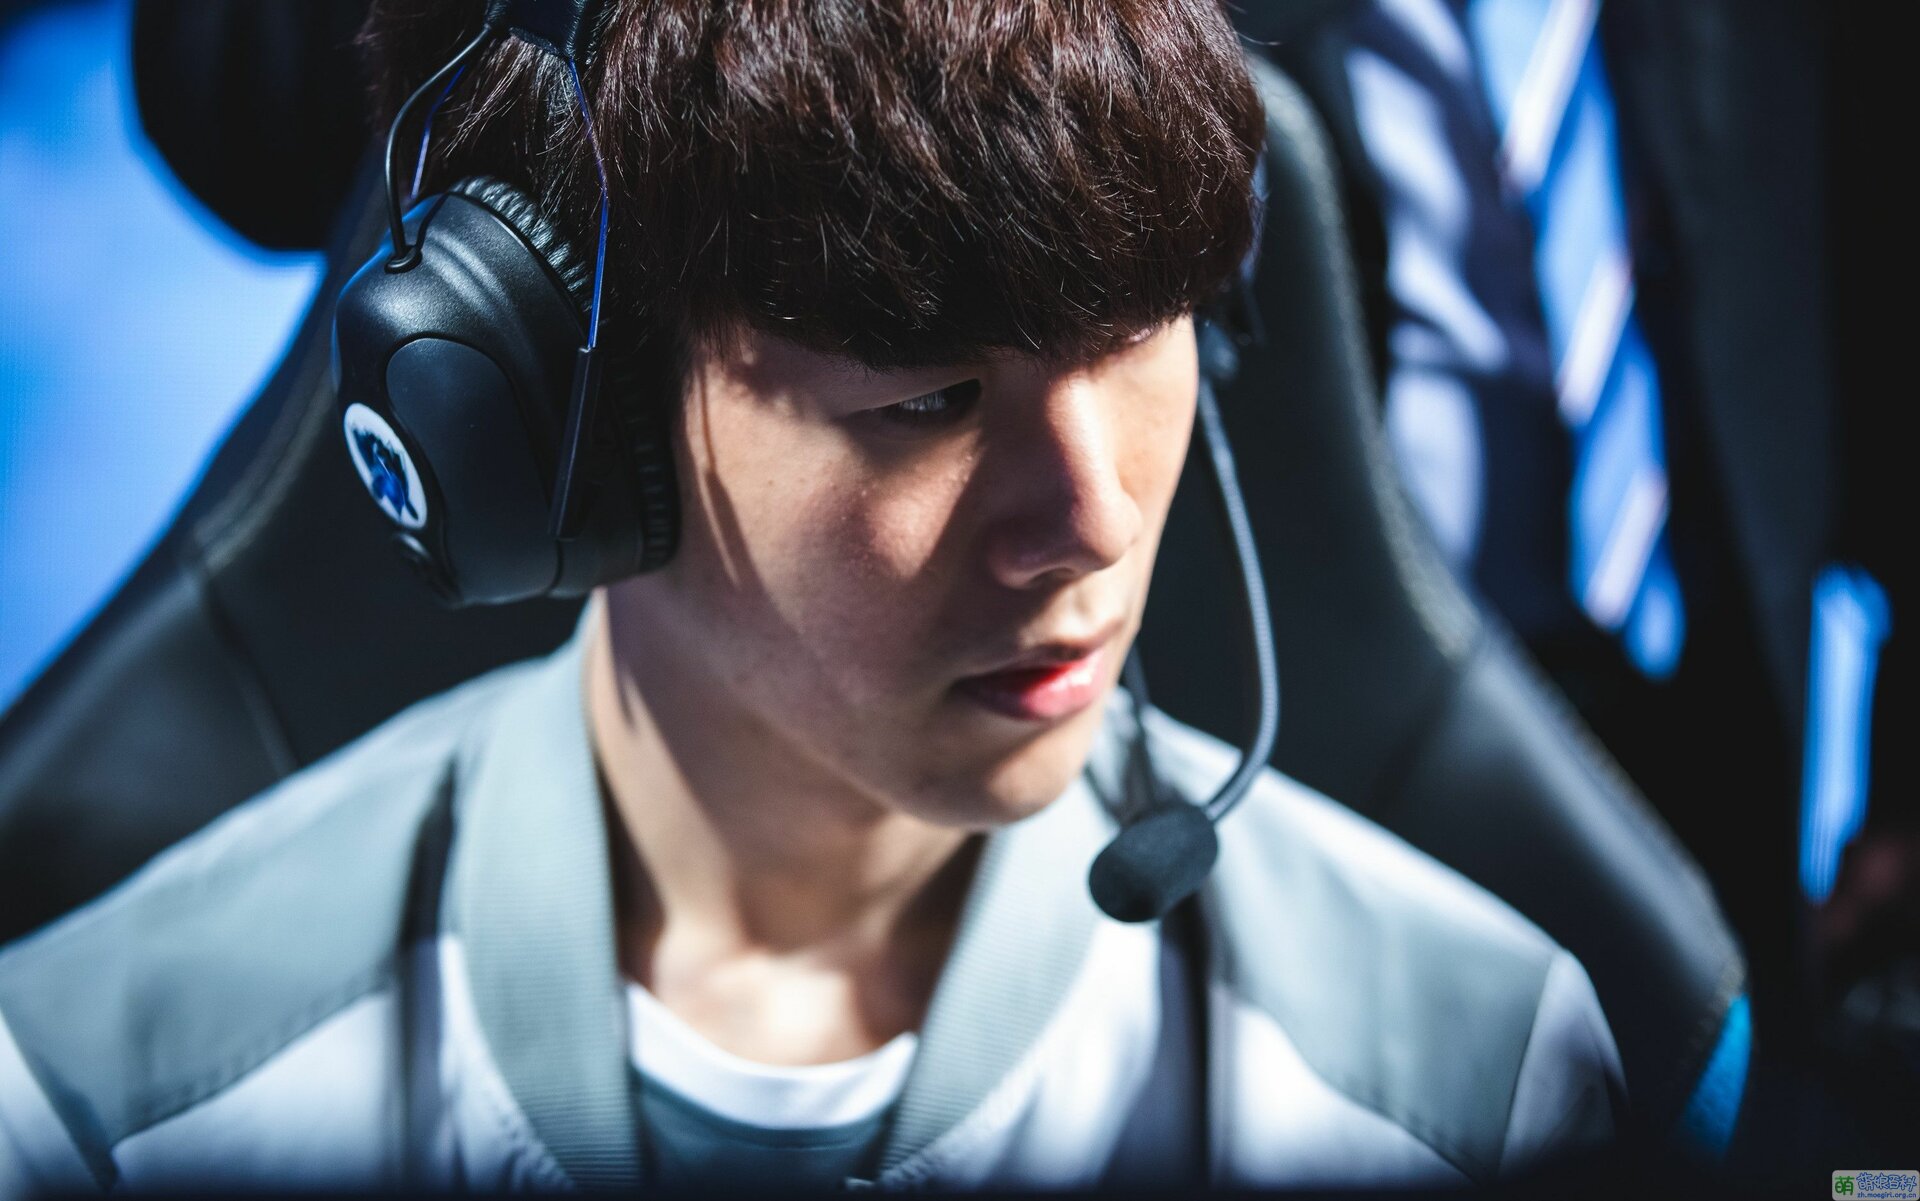 TheShy reveals why he has such a strong affinity for Rookie | ONE Esports | ONE Esports